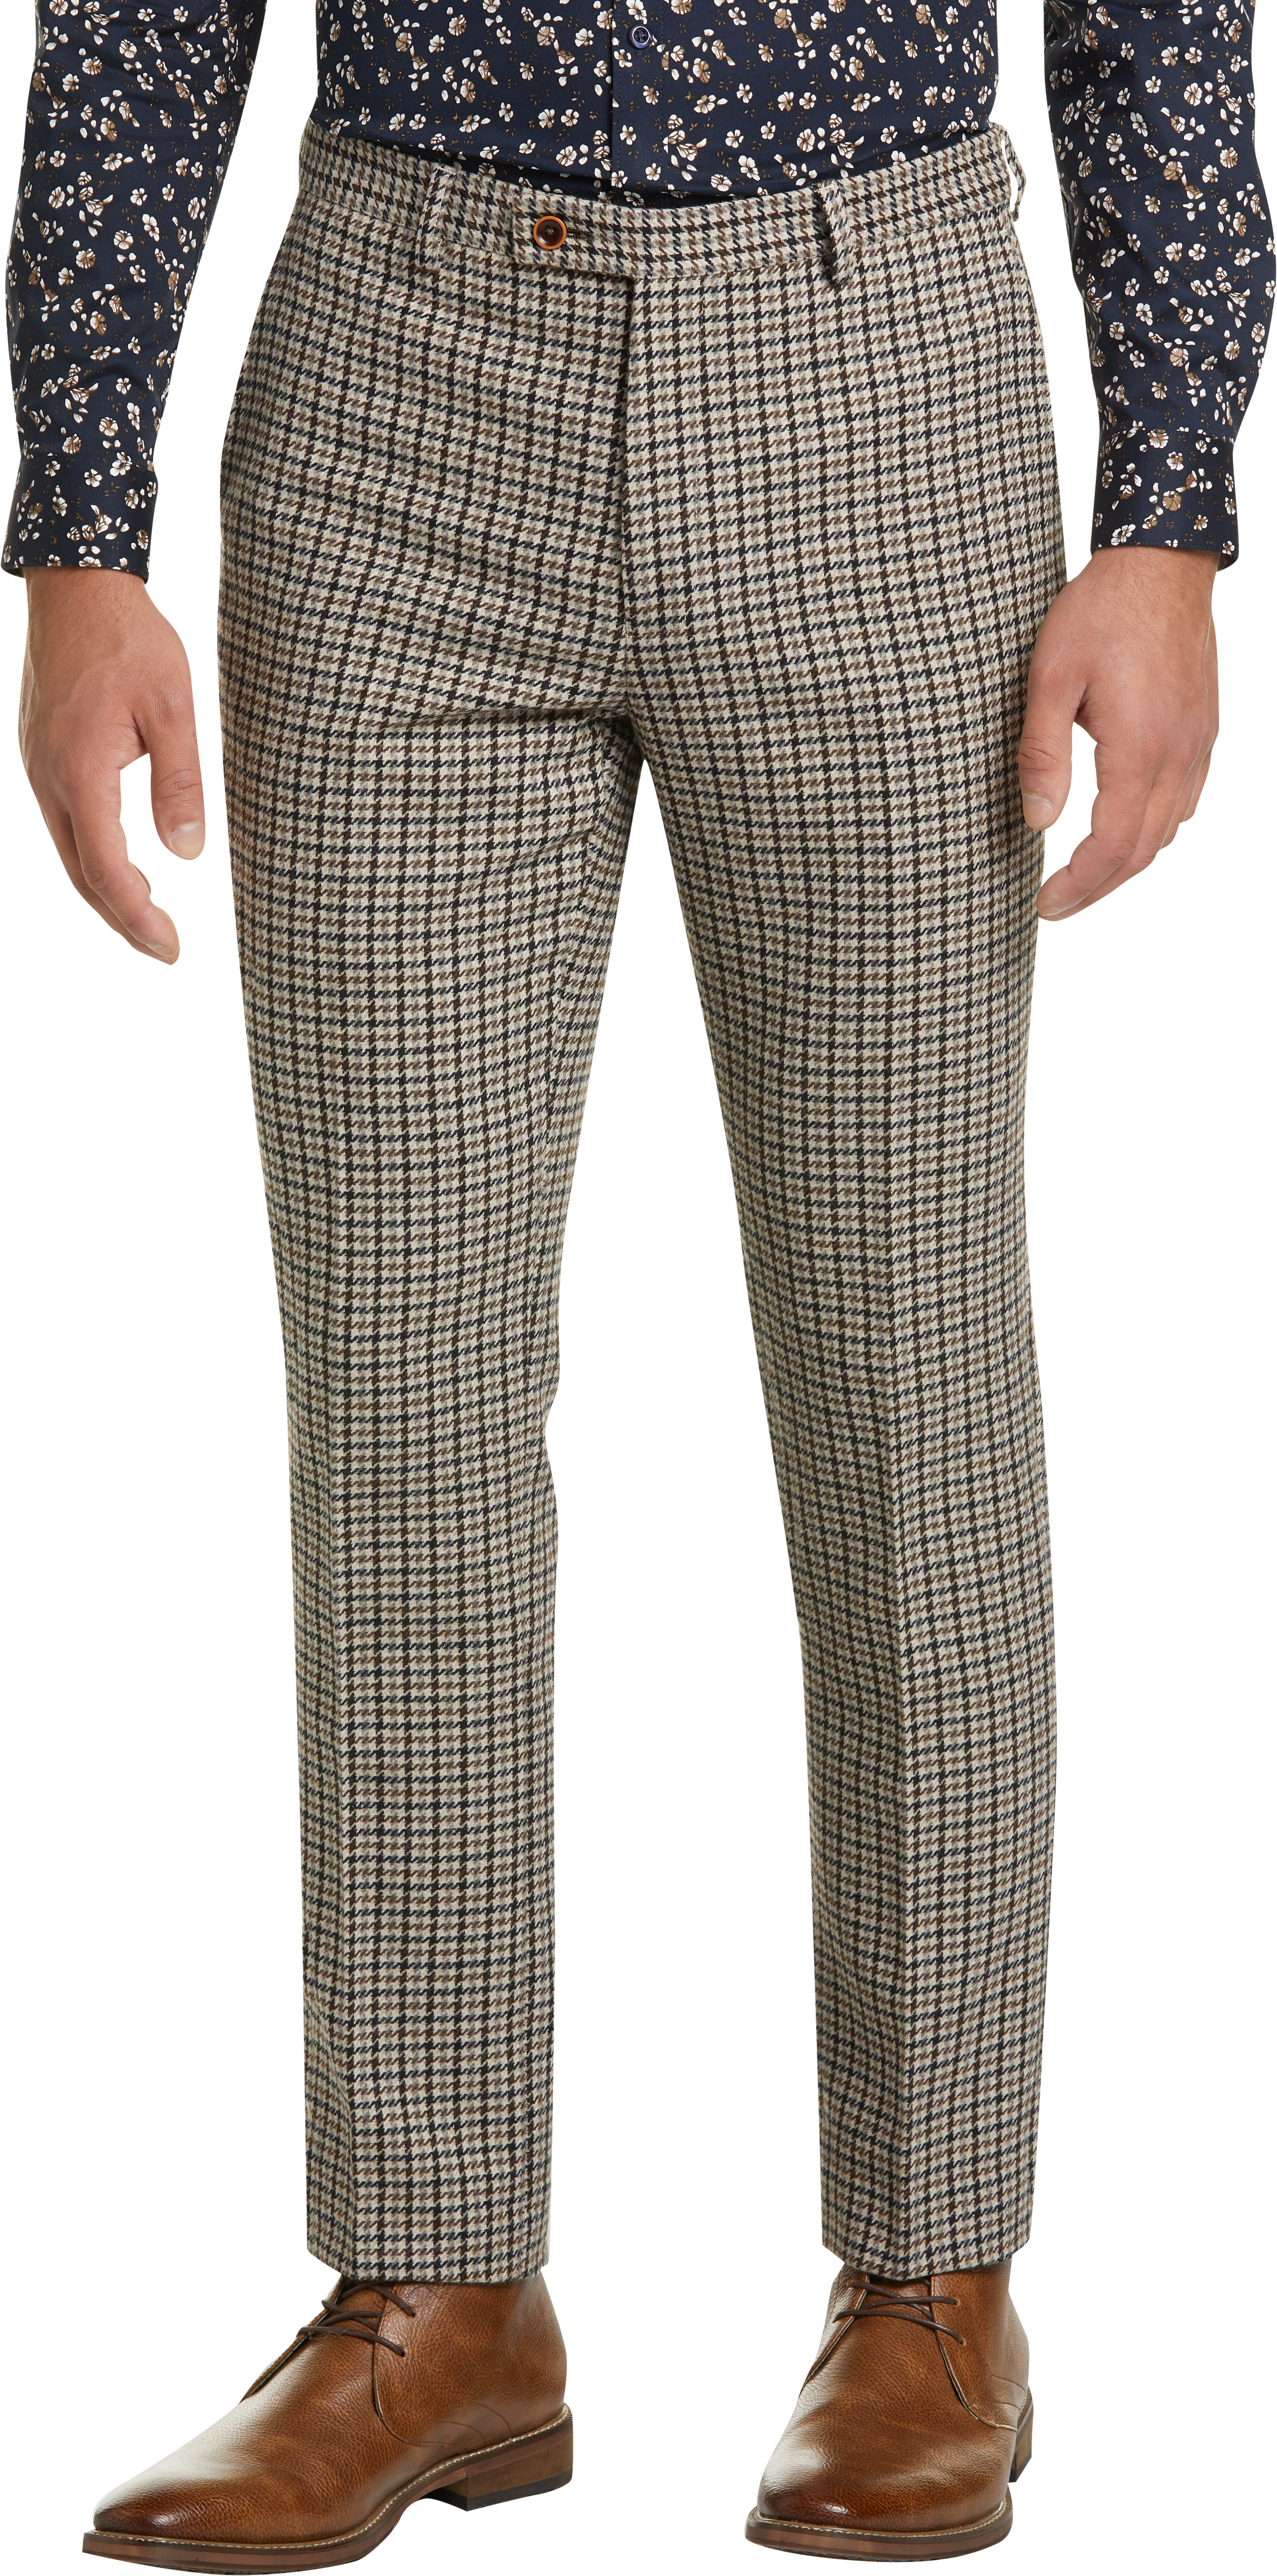 Paisley & Gray Slim Fit Suit Separates Pants, Gray & Brown Houndstooth ...